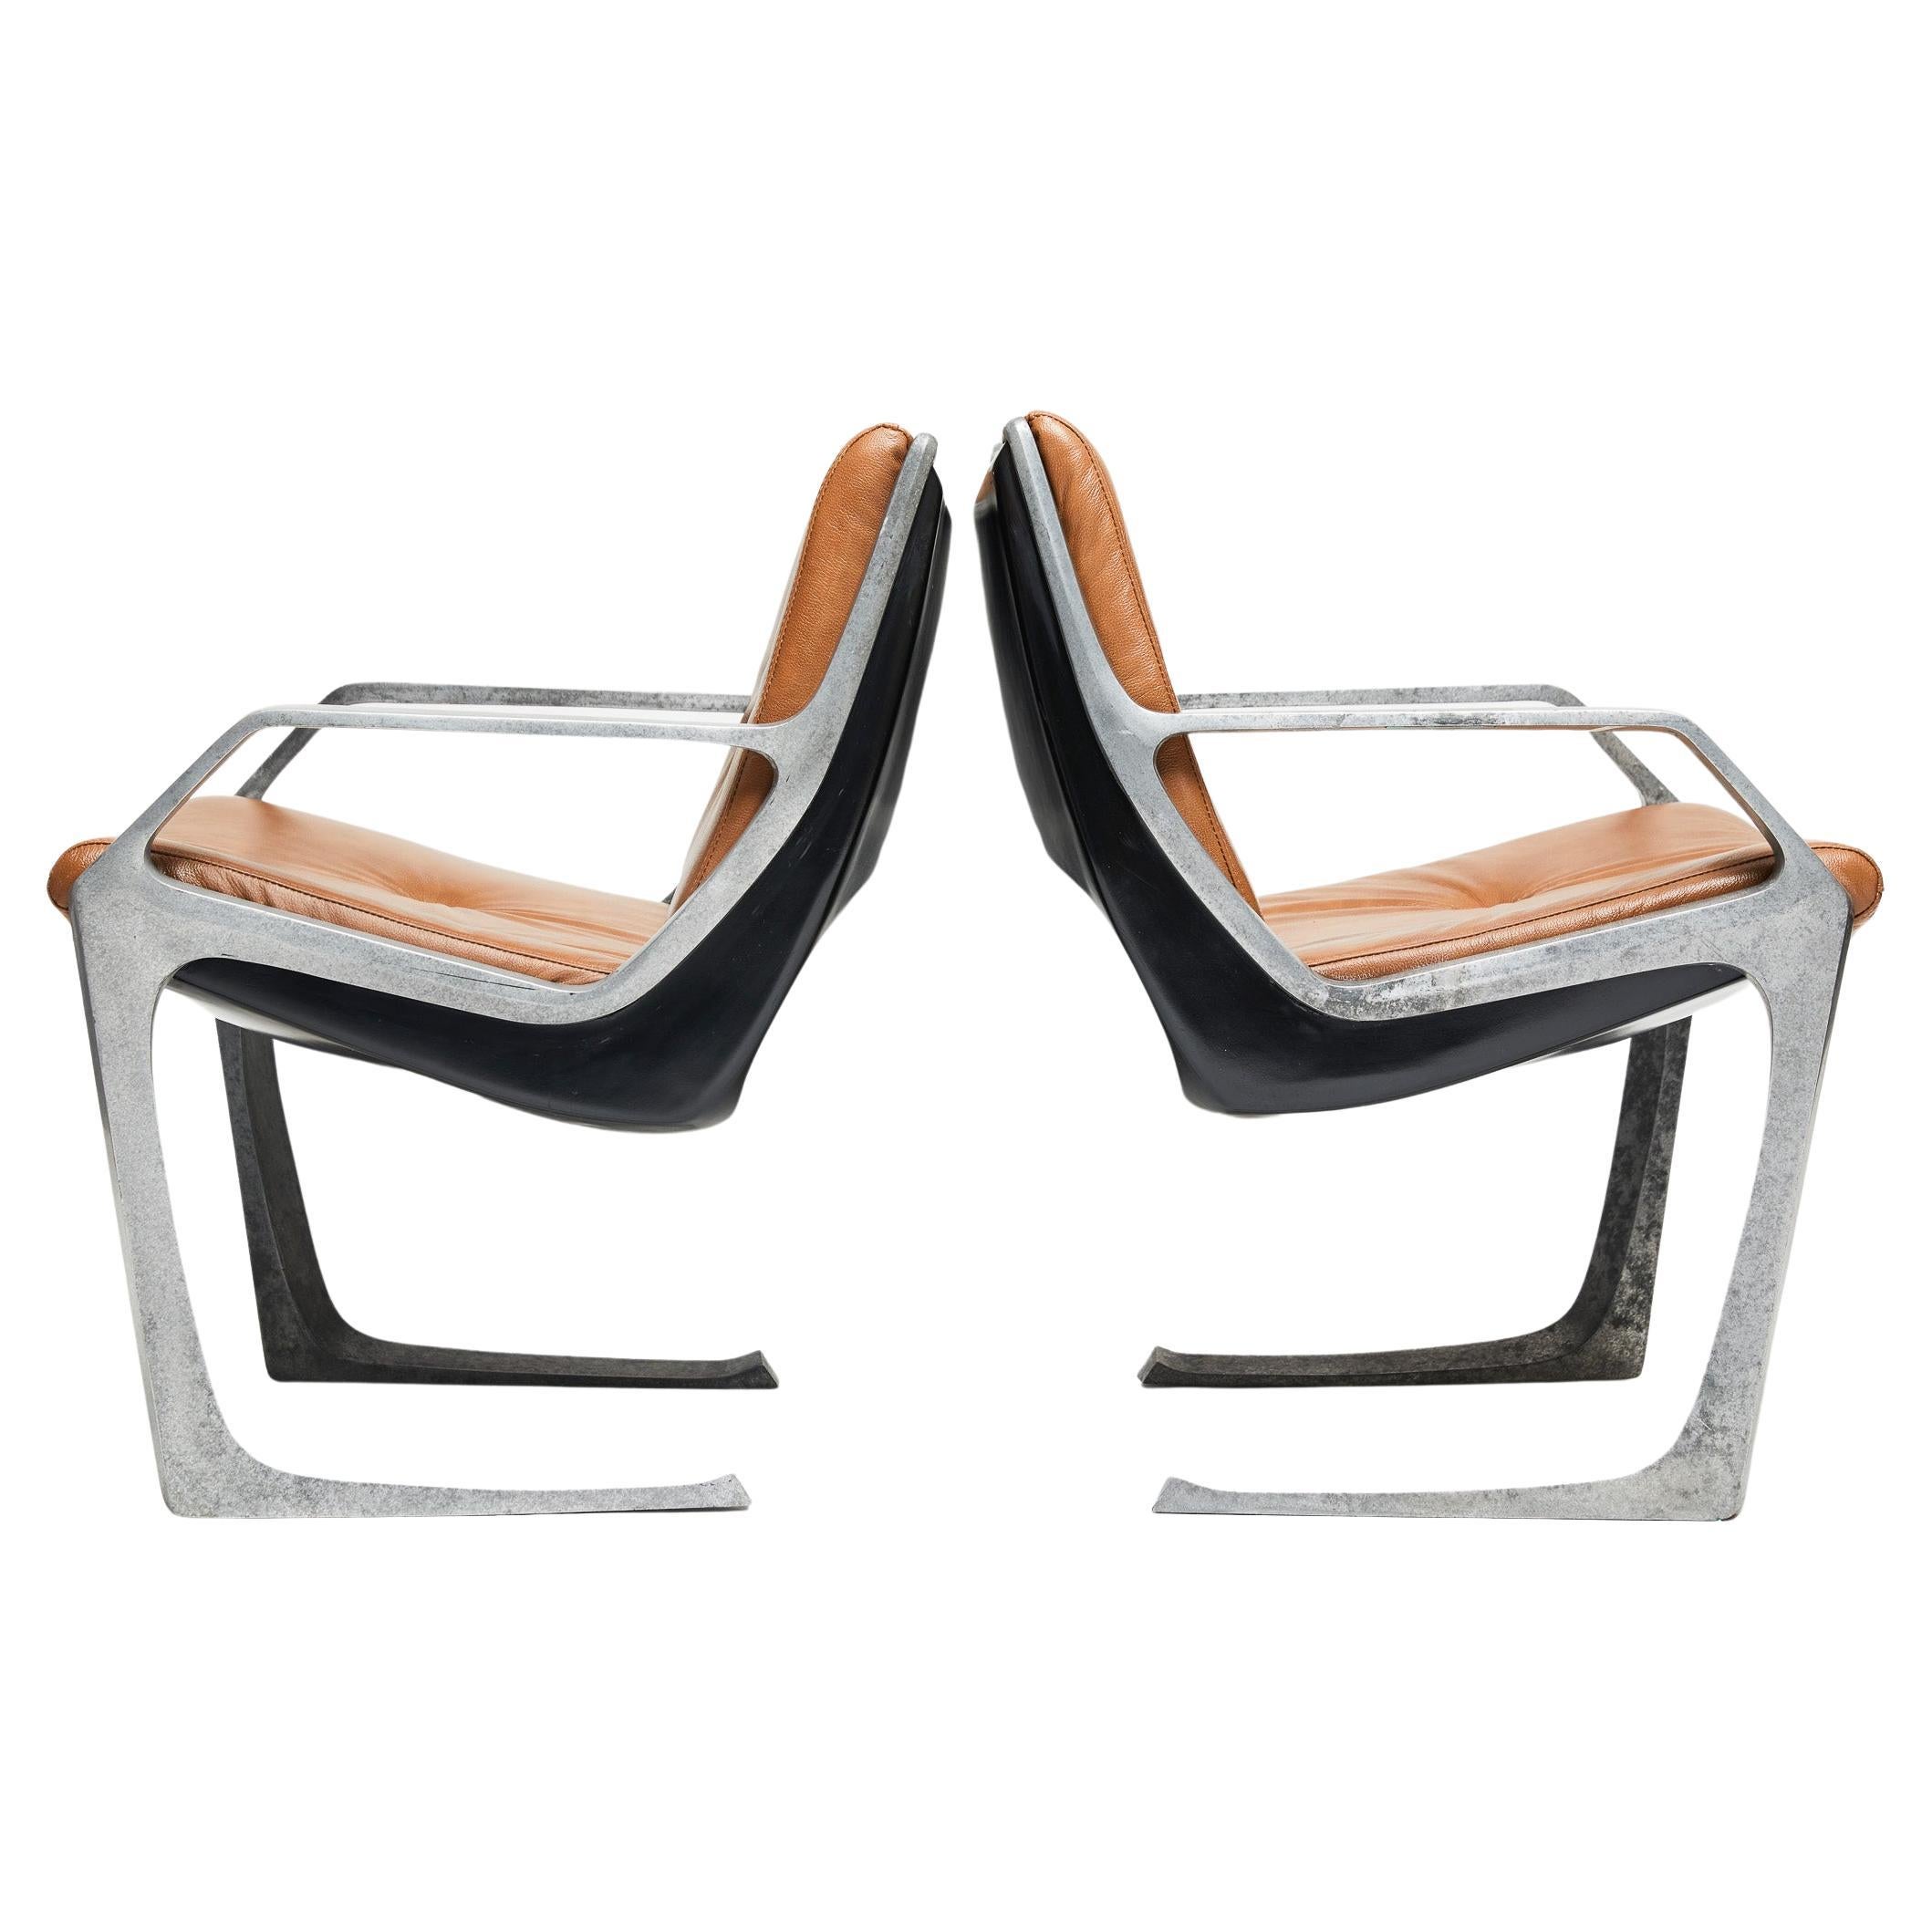 Available now, this Mid-Century Modern armchairs in metal & brown leather were designed by Jorge Zalszupin and manufactured by L’Atelier Moveis in 1970 and are a showstopper! 

The model is called “Fixed Commander” and has become an icon of